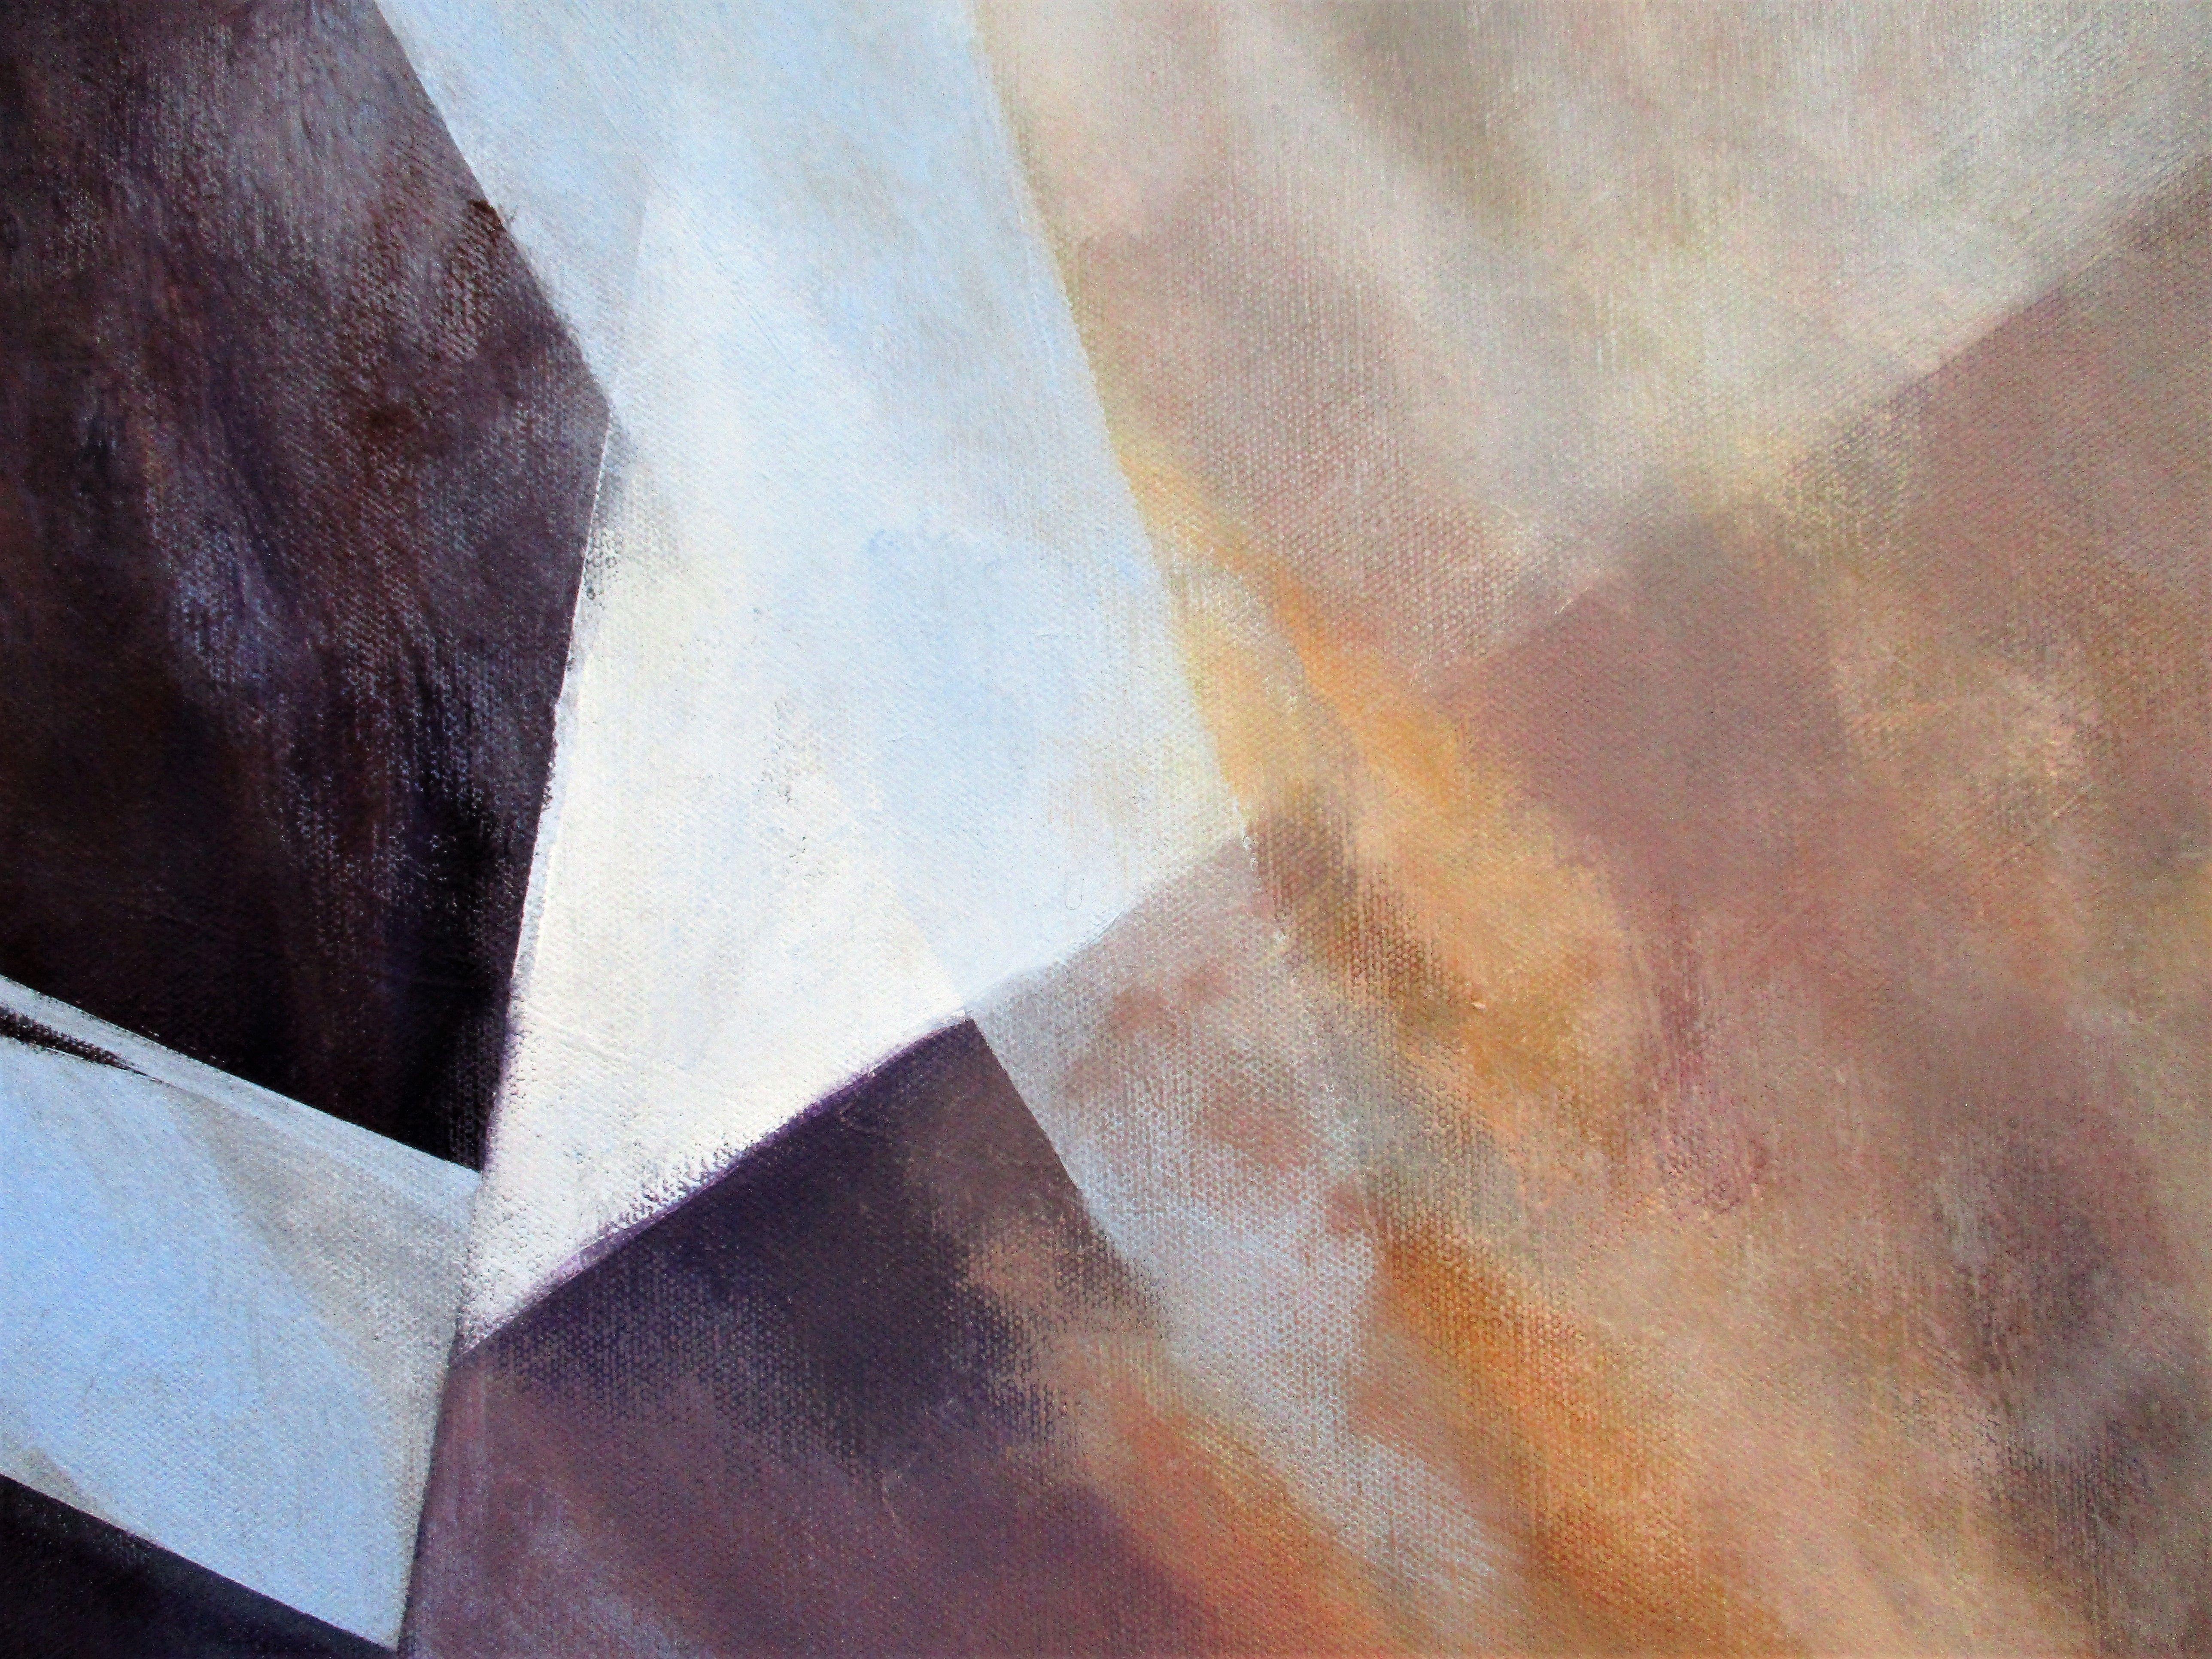 Temporal Shift, Painting, Oil on Canvas - Gray Abstract Painting by Lee Panizza